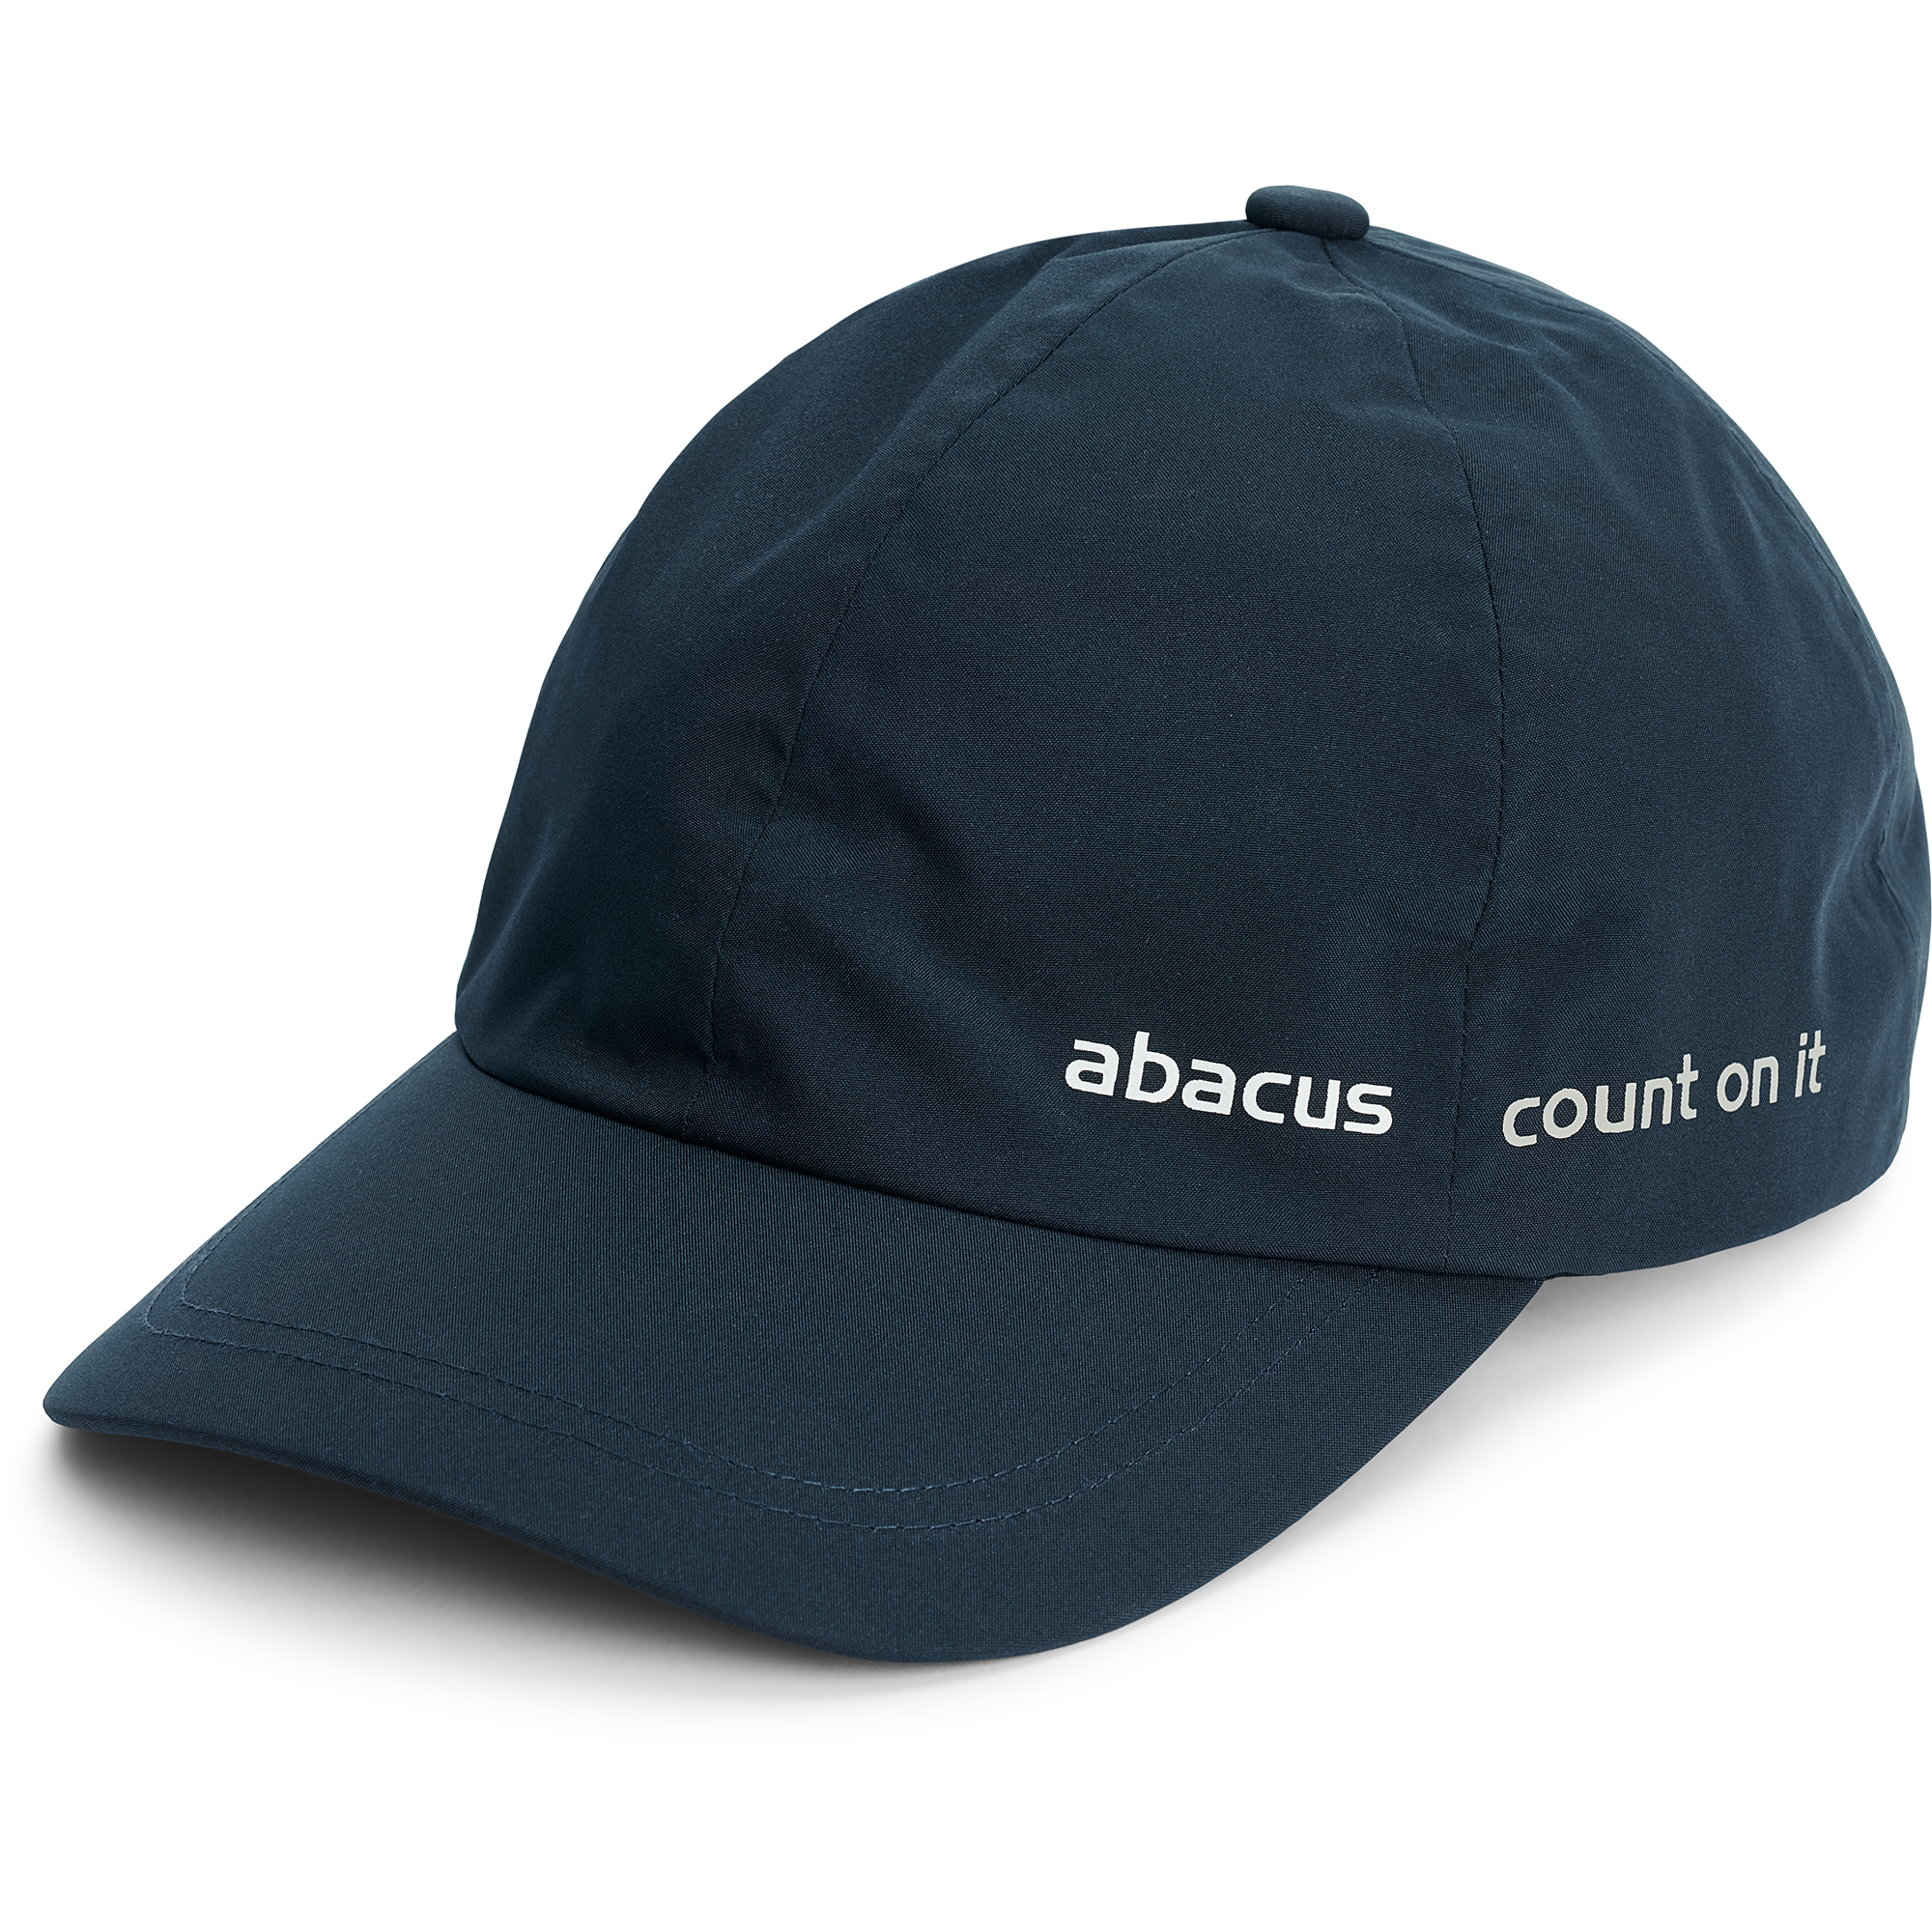 Links raincap - navy in the group WOMEN / All clothing at Abacus Sportswear (7337300)